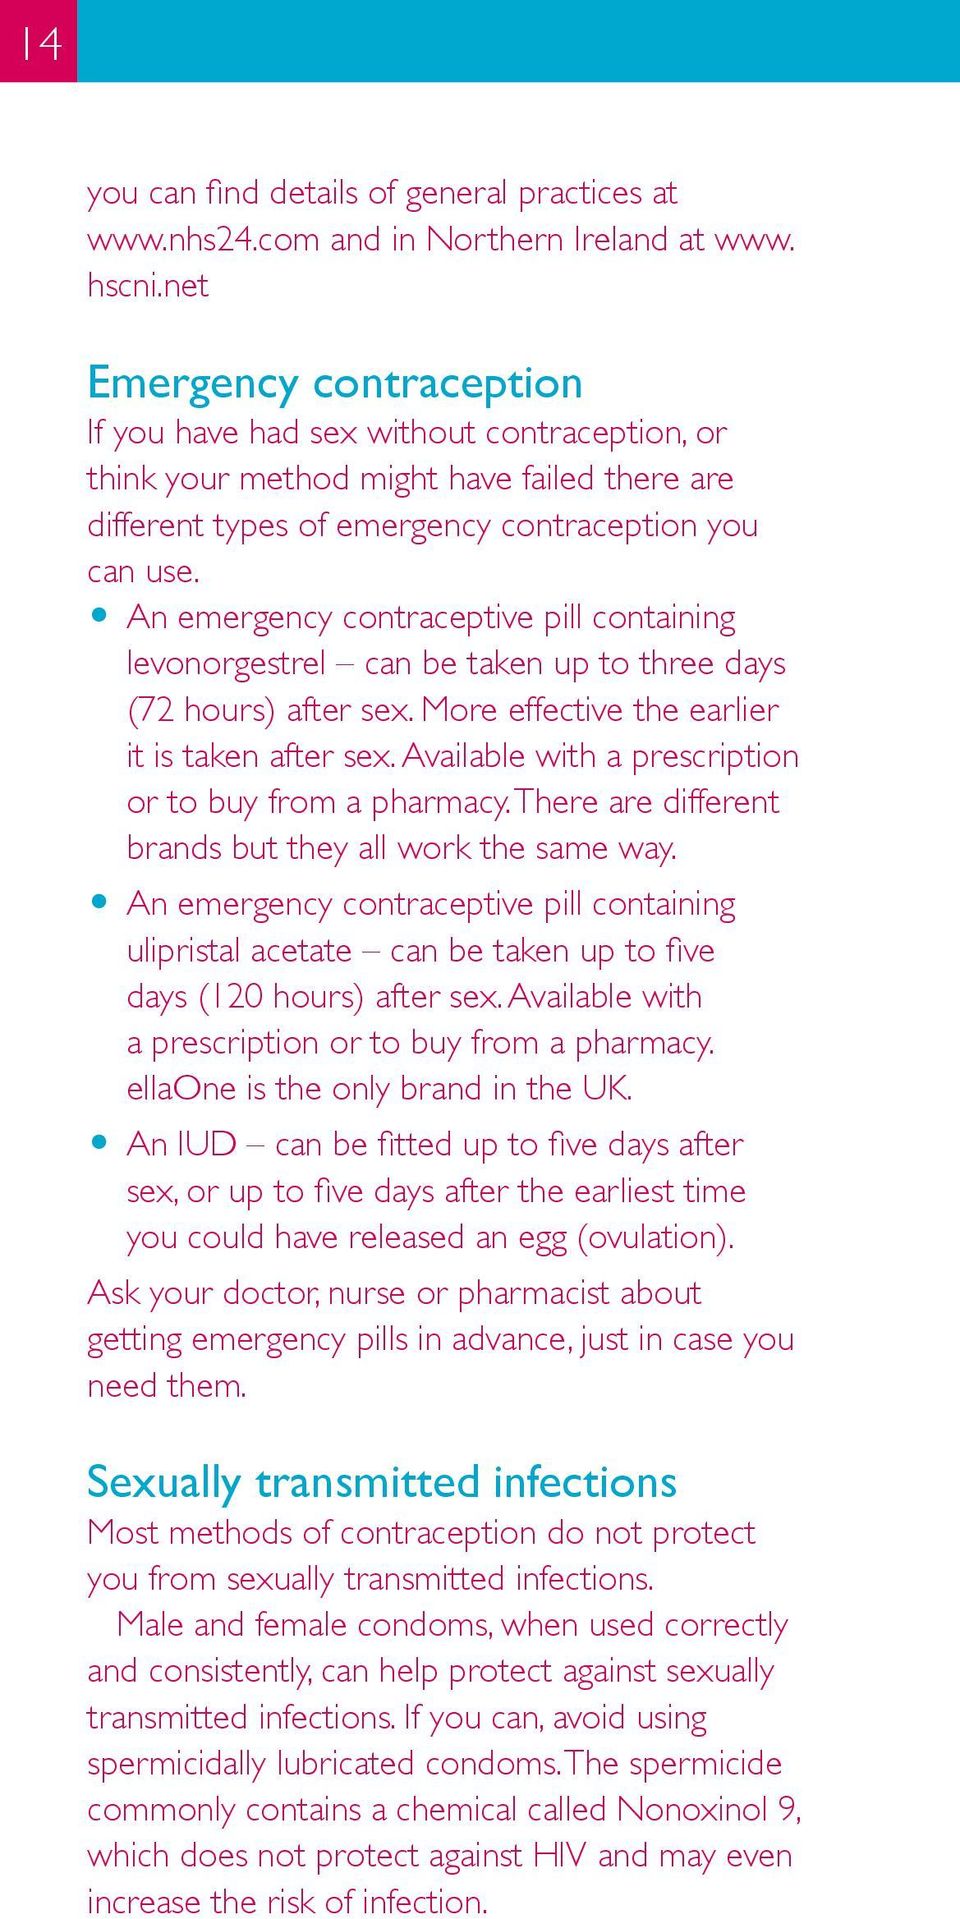 O An emergency contraceptive pill containing levonorgestrel can be taken up to three days (72 hours) after sex. More effective the earlier it is taken after sex.